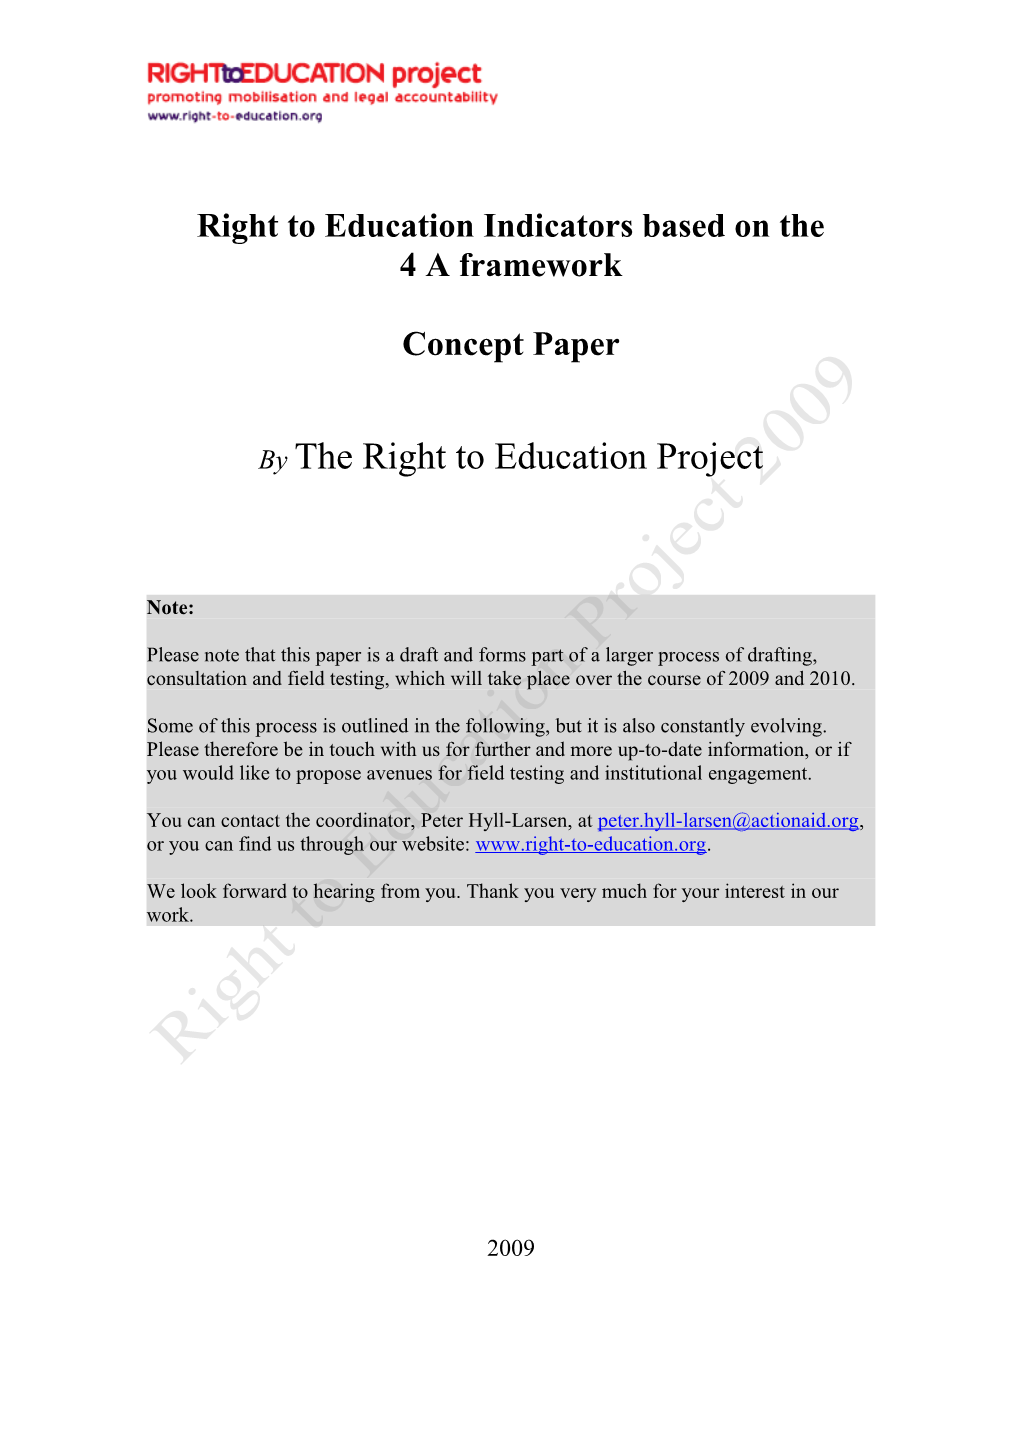 Right to Education Indicators Based on The